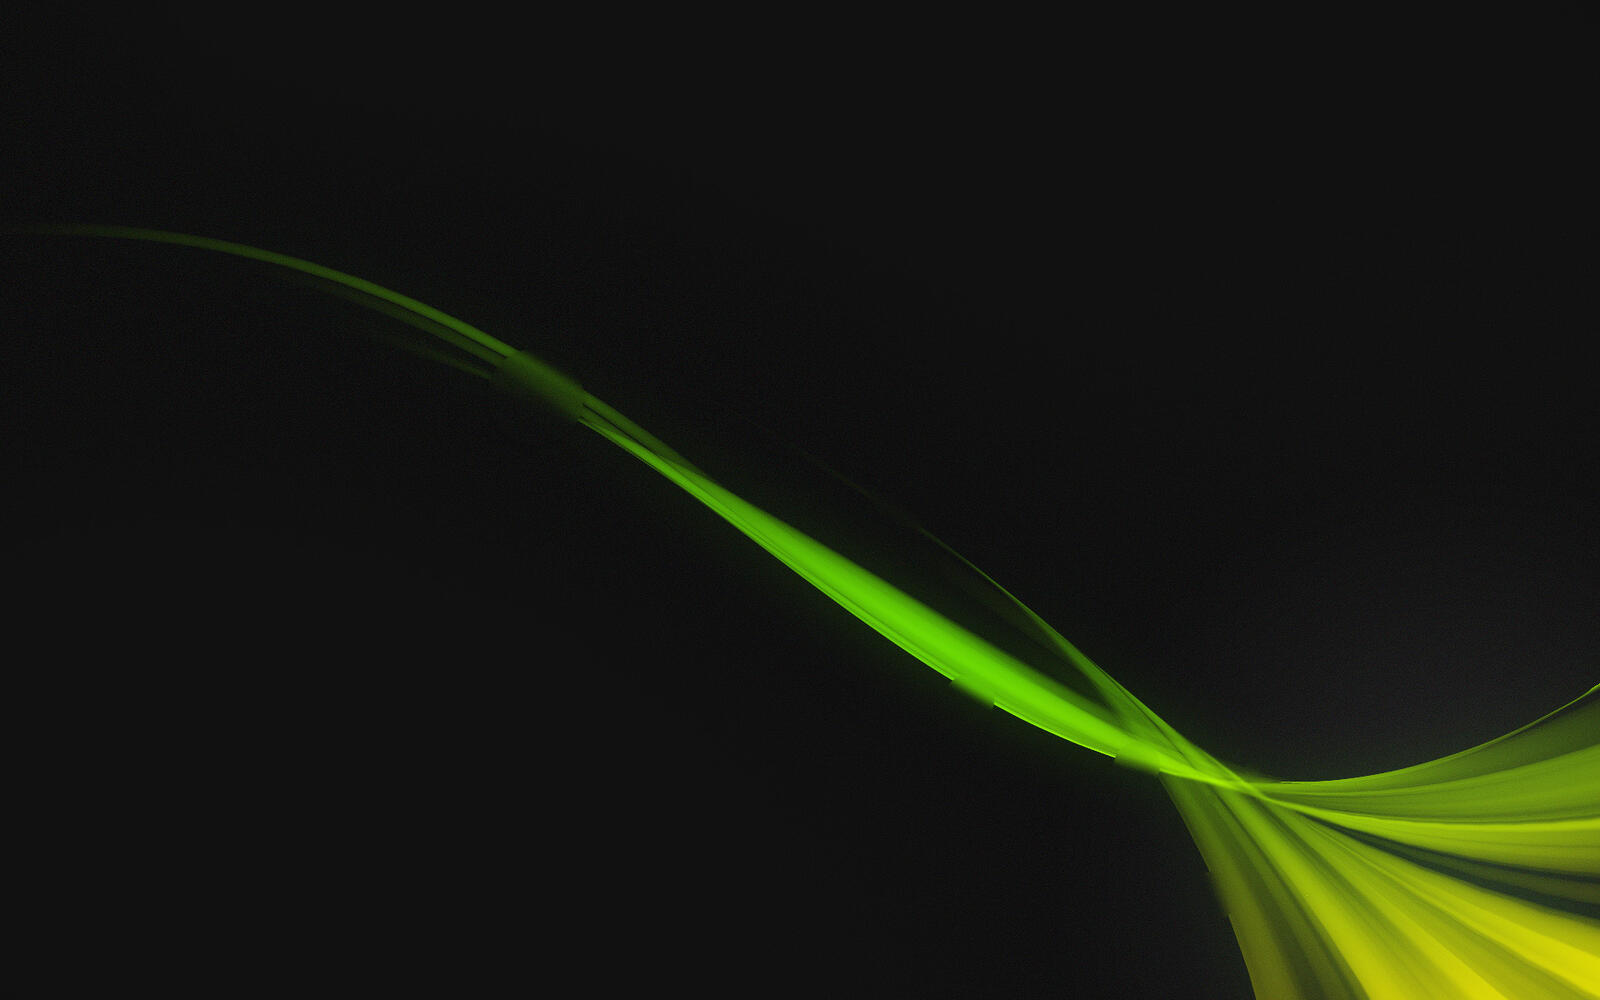 Wallpapers abstraction black background green lines on the desktop